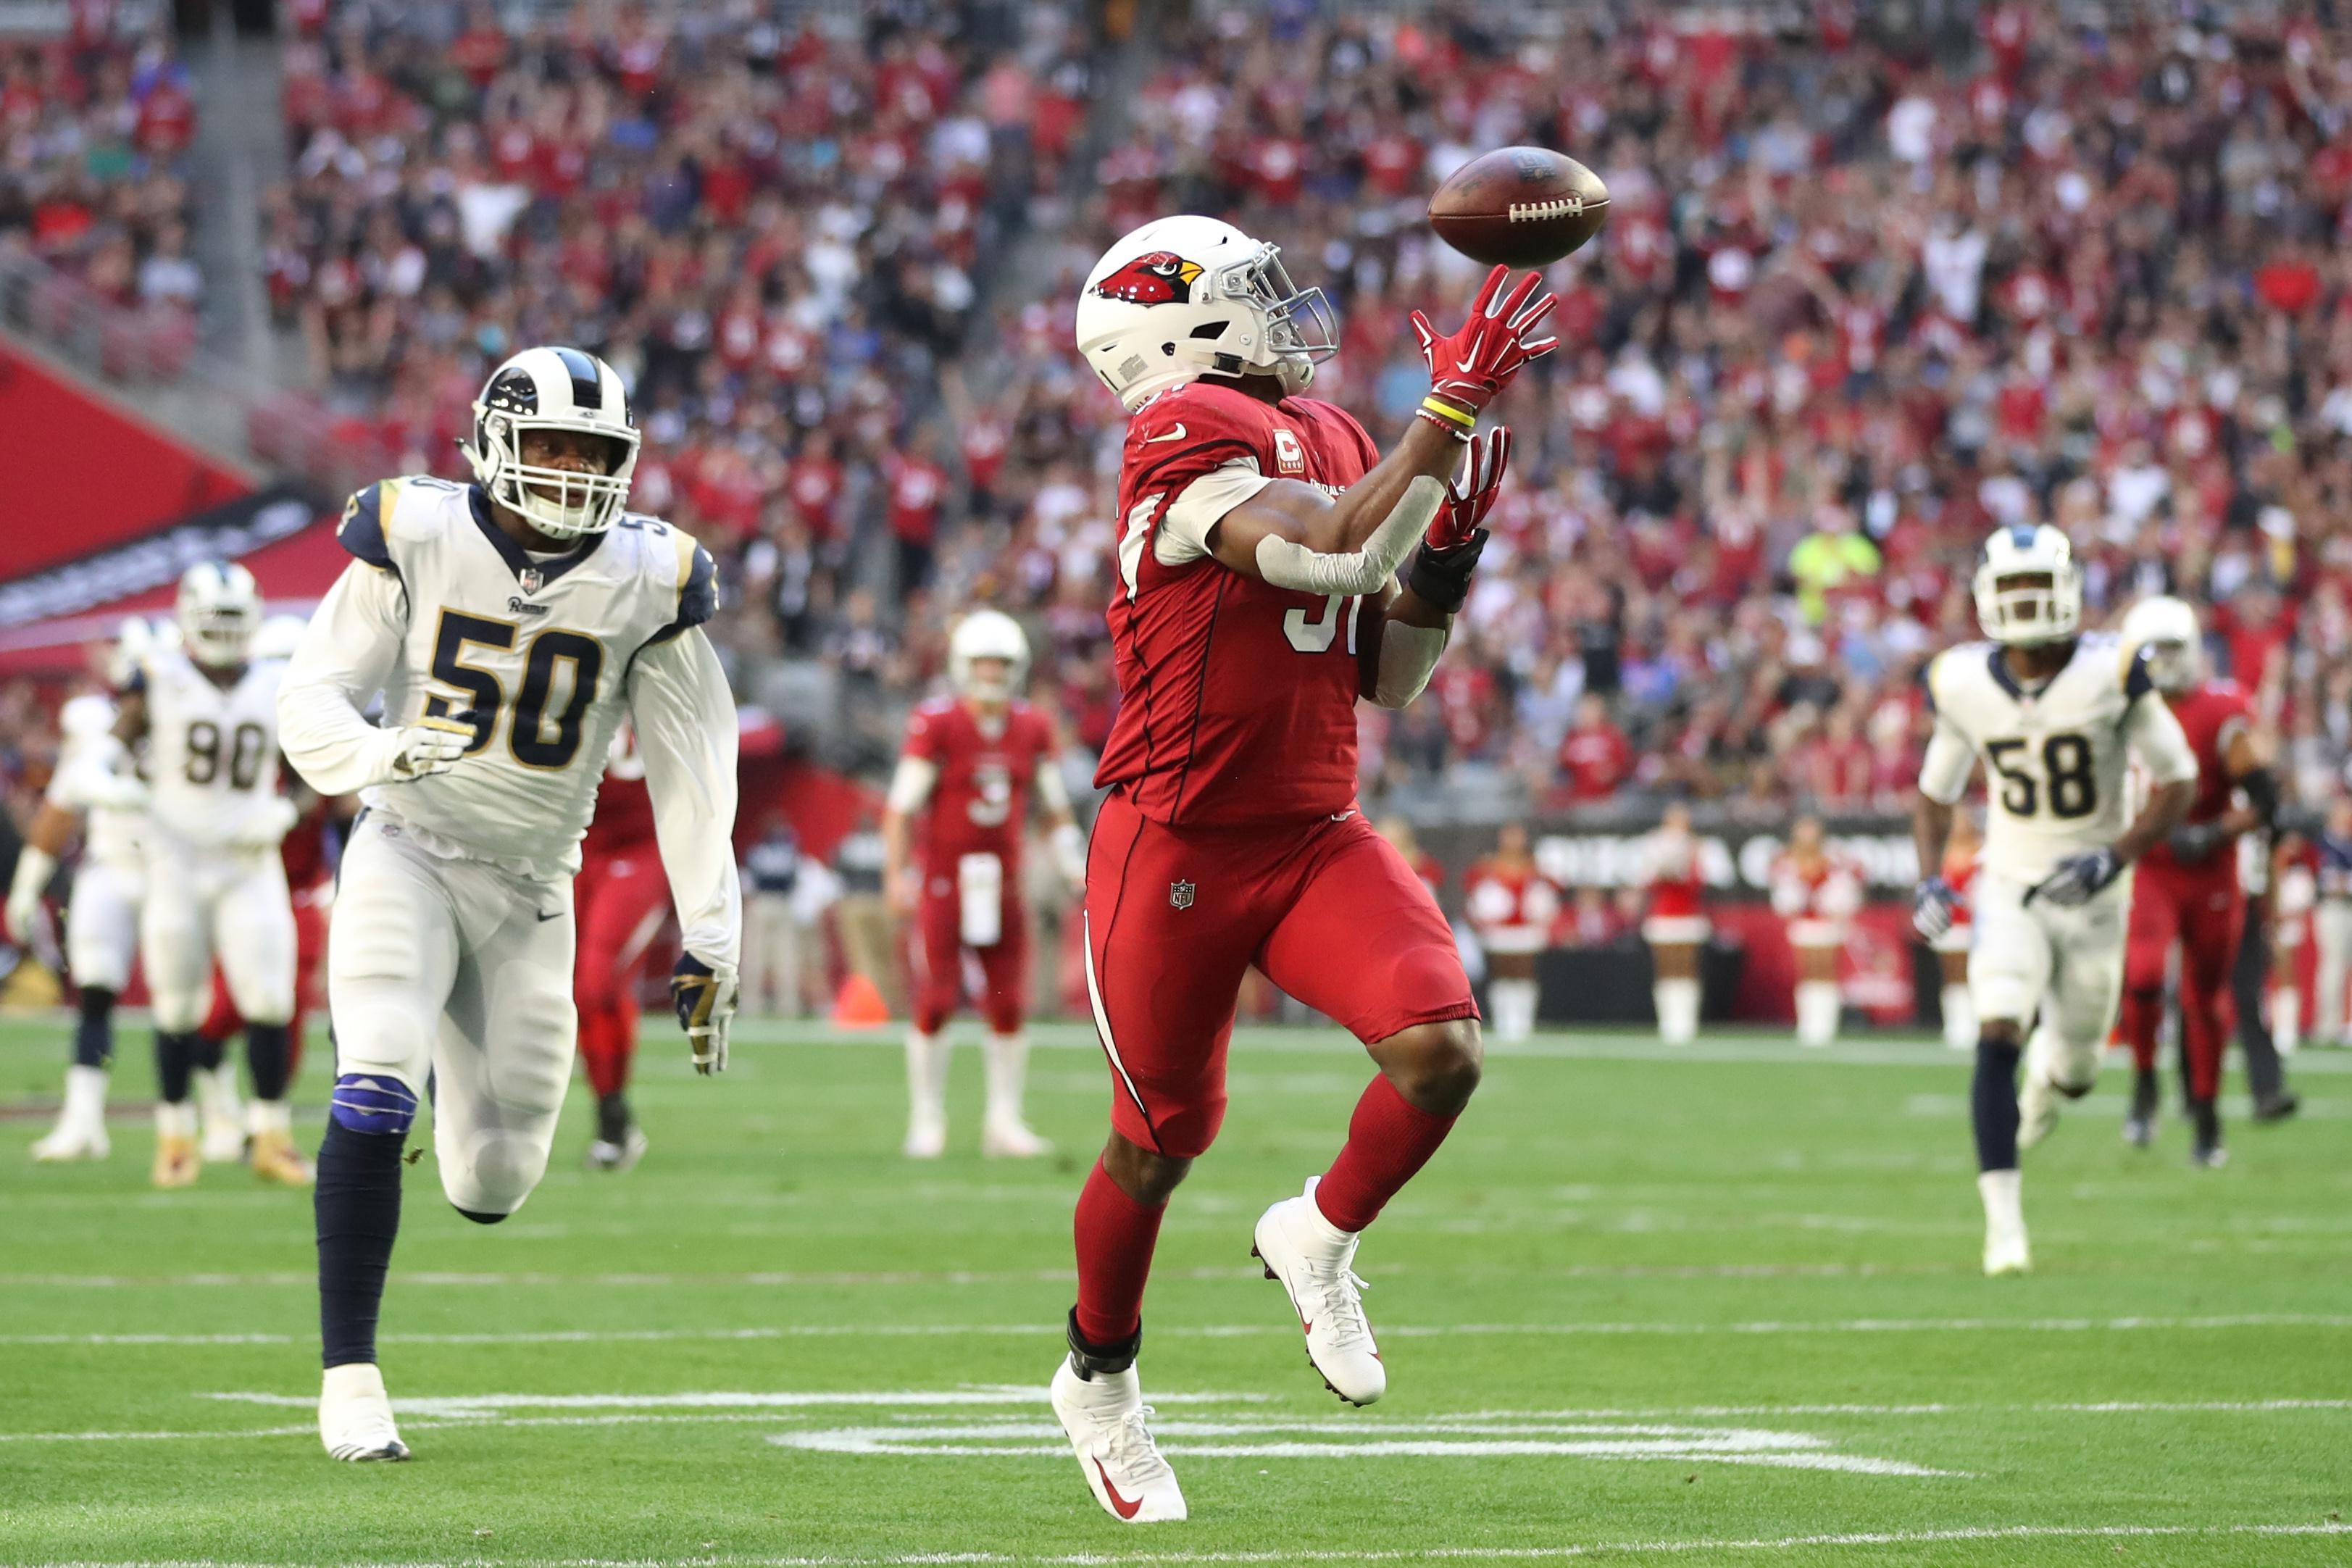 GLENDALE, ARIZONA - DECEMBER 23: David Johnson #31 of the Arizona Cardinals catches a 32 yard touchdown pass from wide receiver Larry Fitzgerald #11 in the first half of the NFL game against the Los Angeles Rams at State Farm Stadium on December 23, 2018 in Glendale, Arizona. (Photo by Christian Petersen/Getty Images)